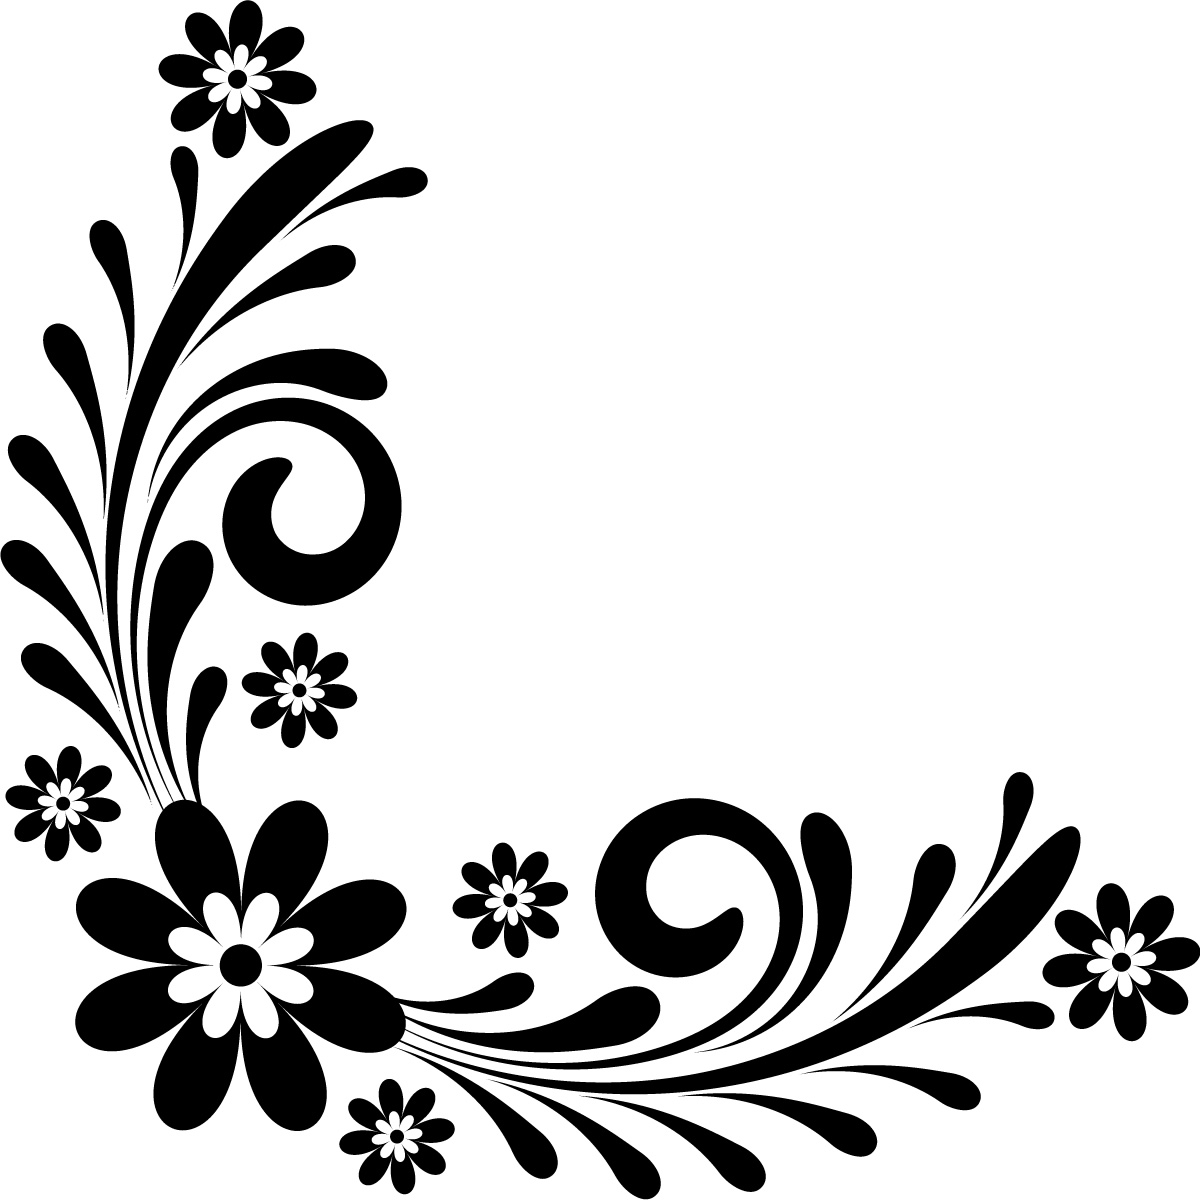 Page Border Designs Flowers Black And White | Free Download Clip